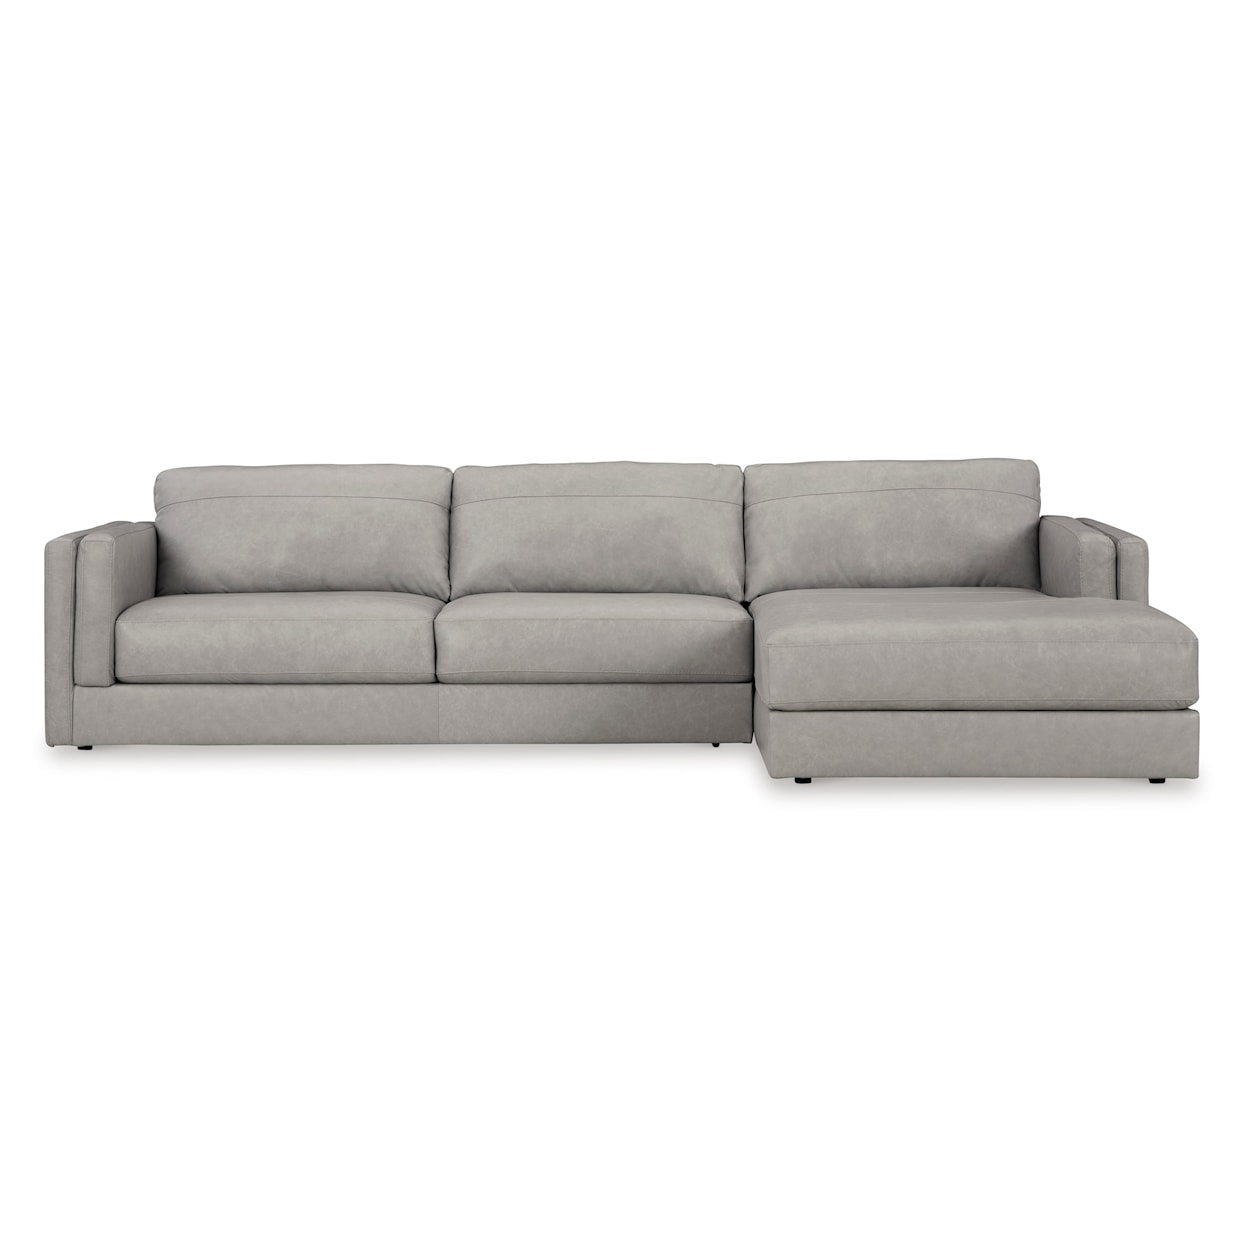 Signature Design by Ashley Amiata 2-Piece Sectional With Chaise